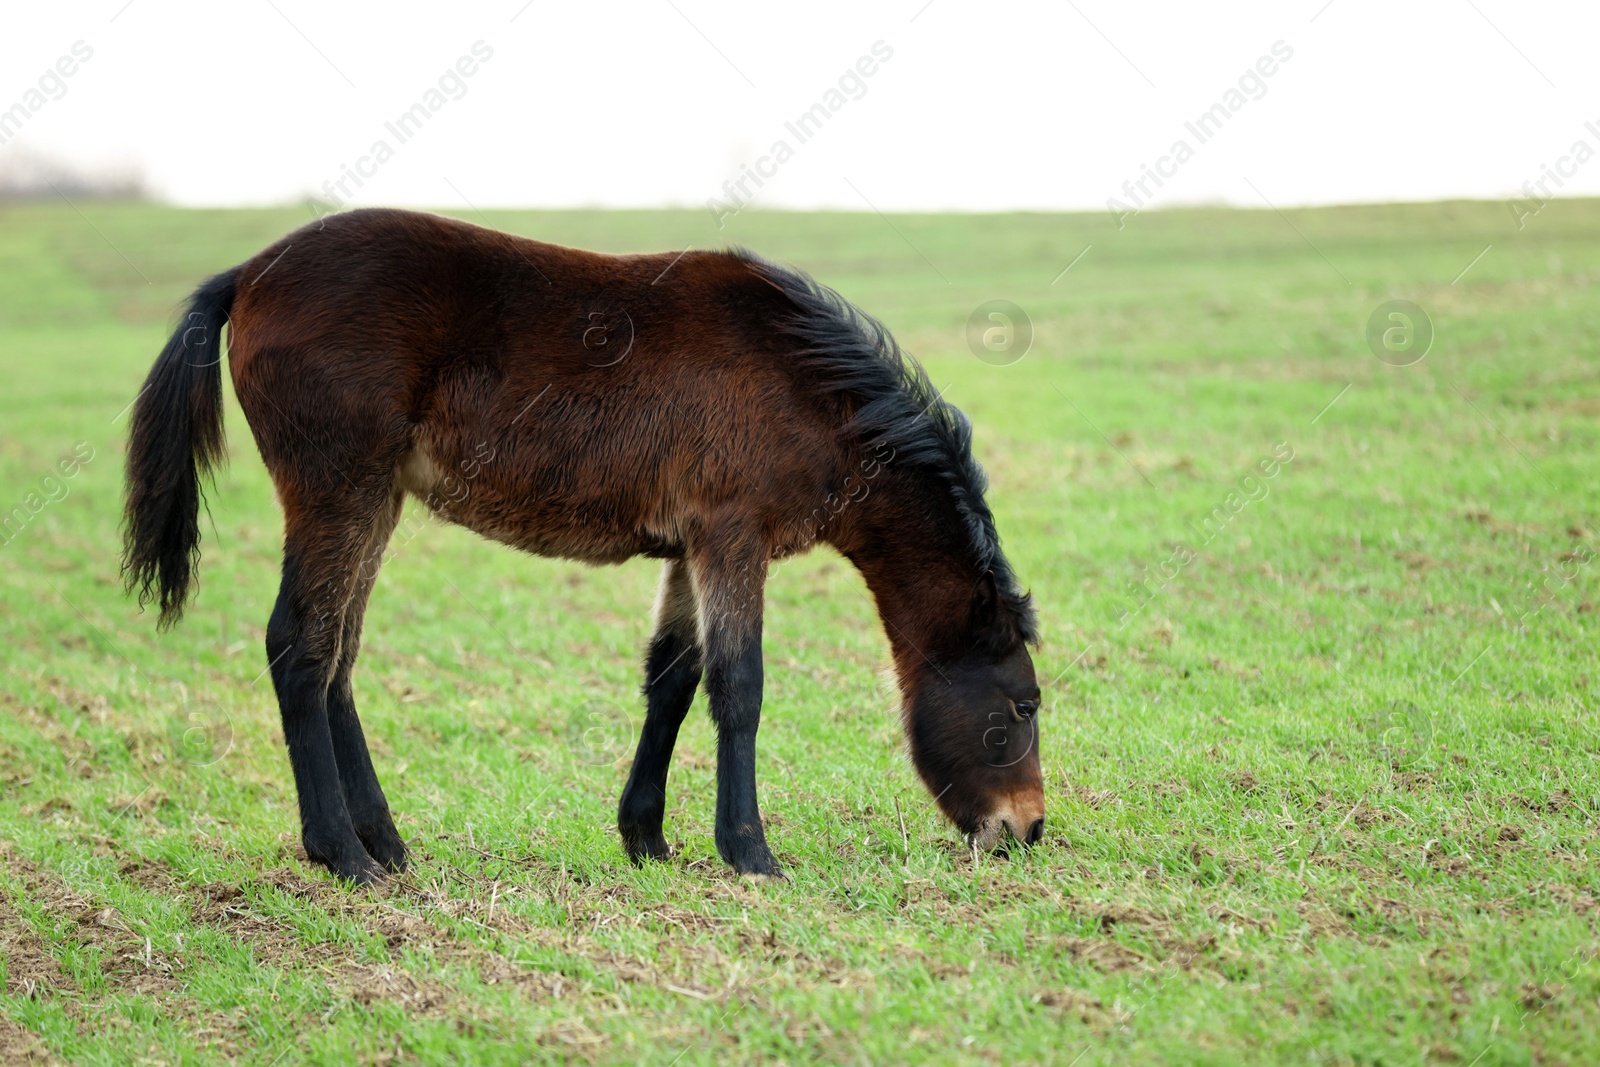 Photo of Adorable dark horse grazing outdoors. Lovely domesticated pet